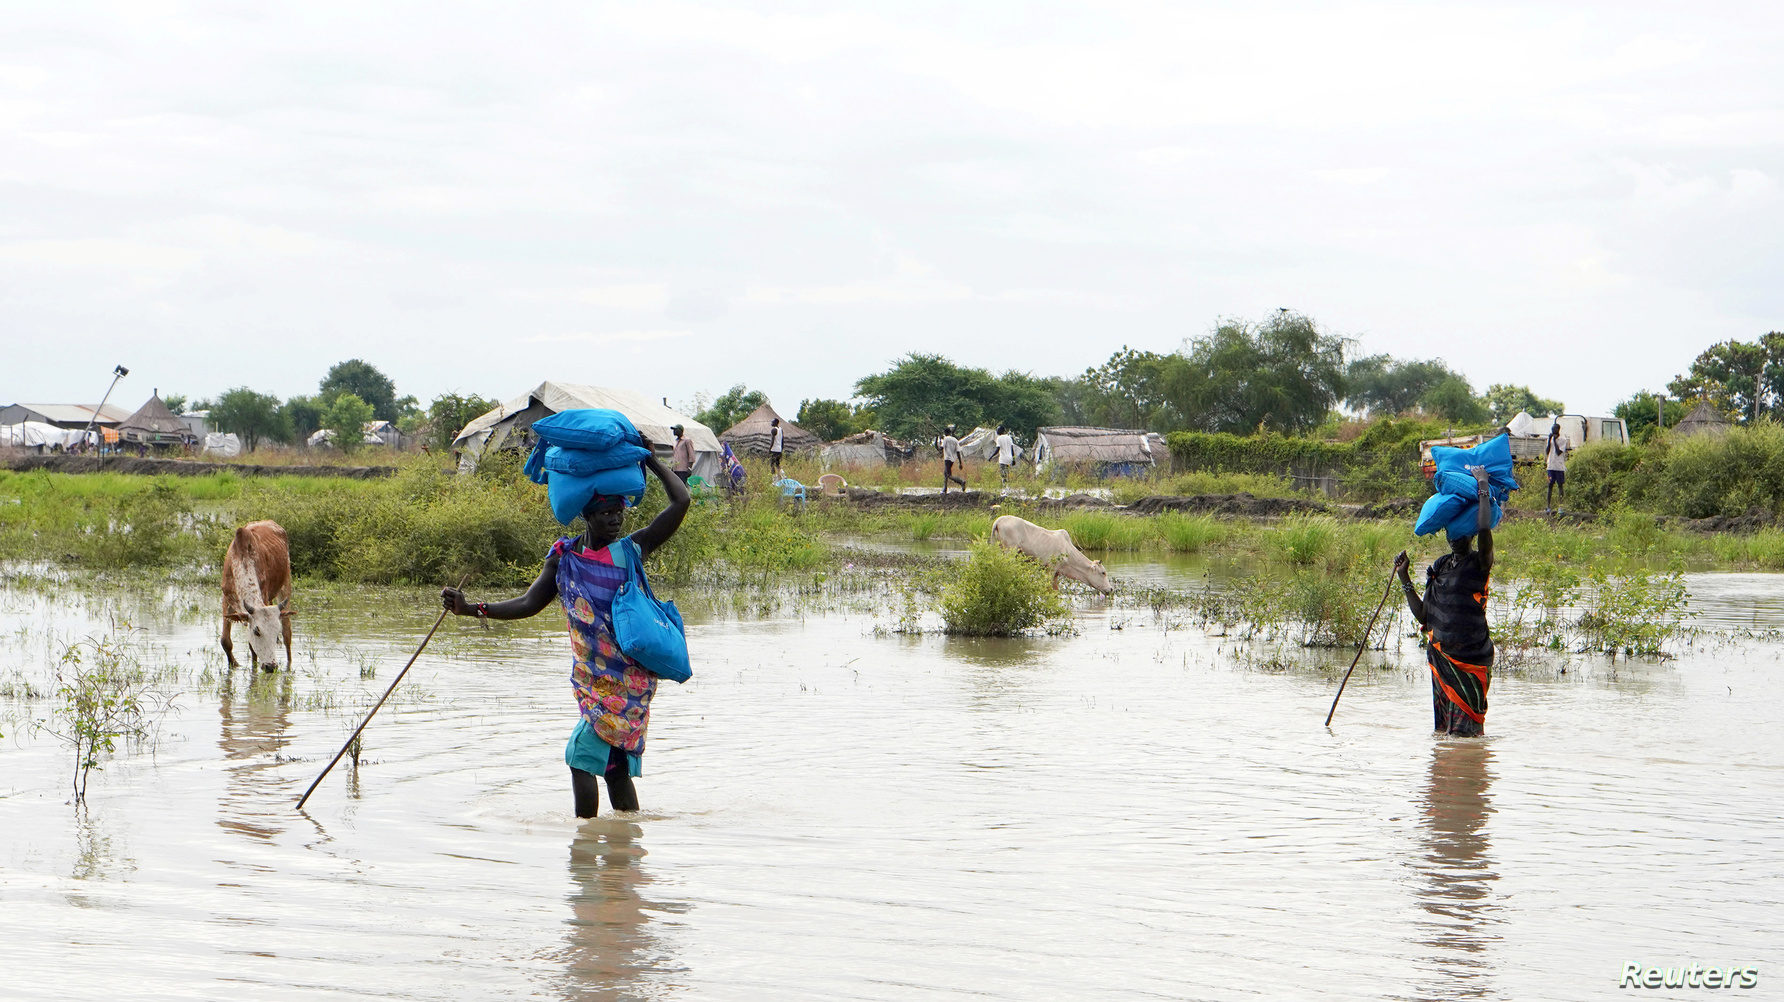 Women carry belongings on their heads as they wade through water, after heavy rains and floods forced hundreds of thousands of people to leave their homes, in the town of Pibor, Boma state, South Sudan, Nov. 6, 2019.